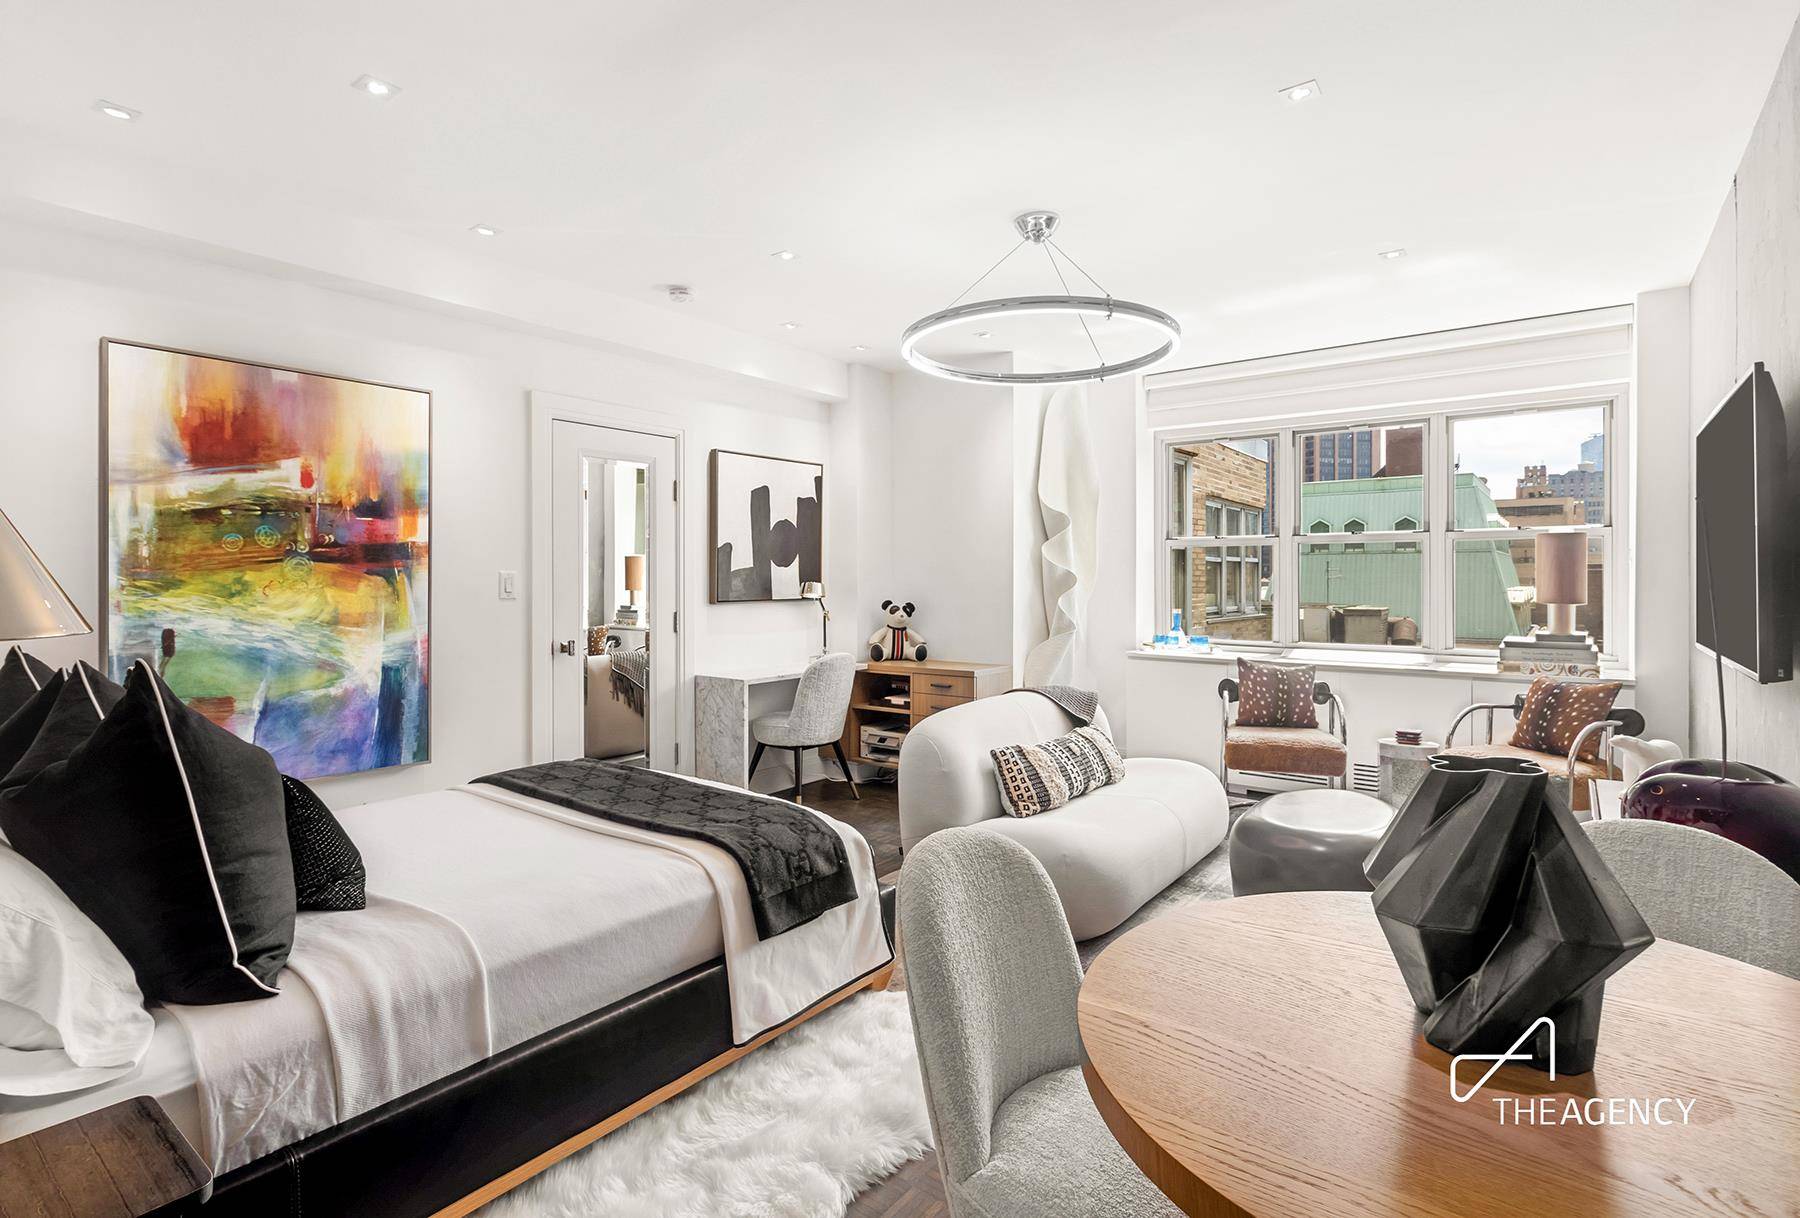 Penthouse A is a turnkey condo located moments from Grand Central.